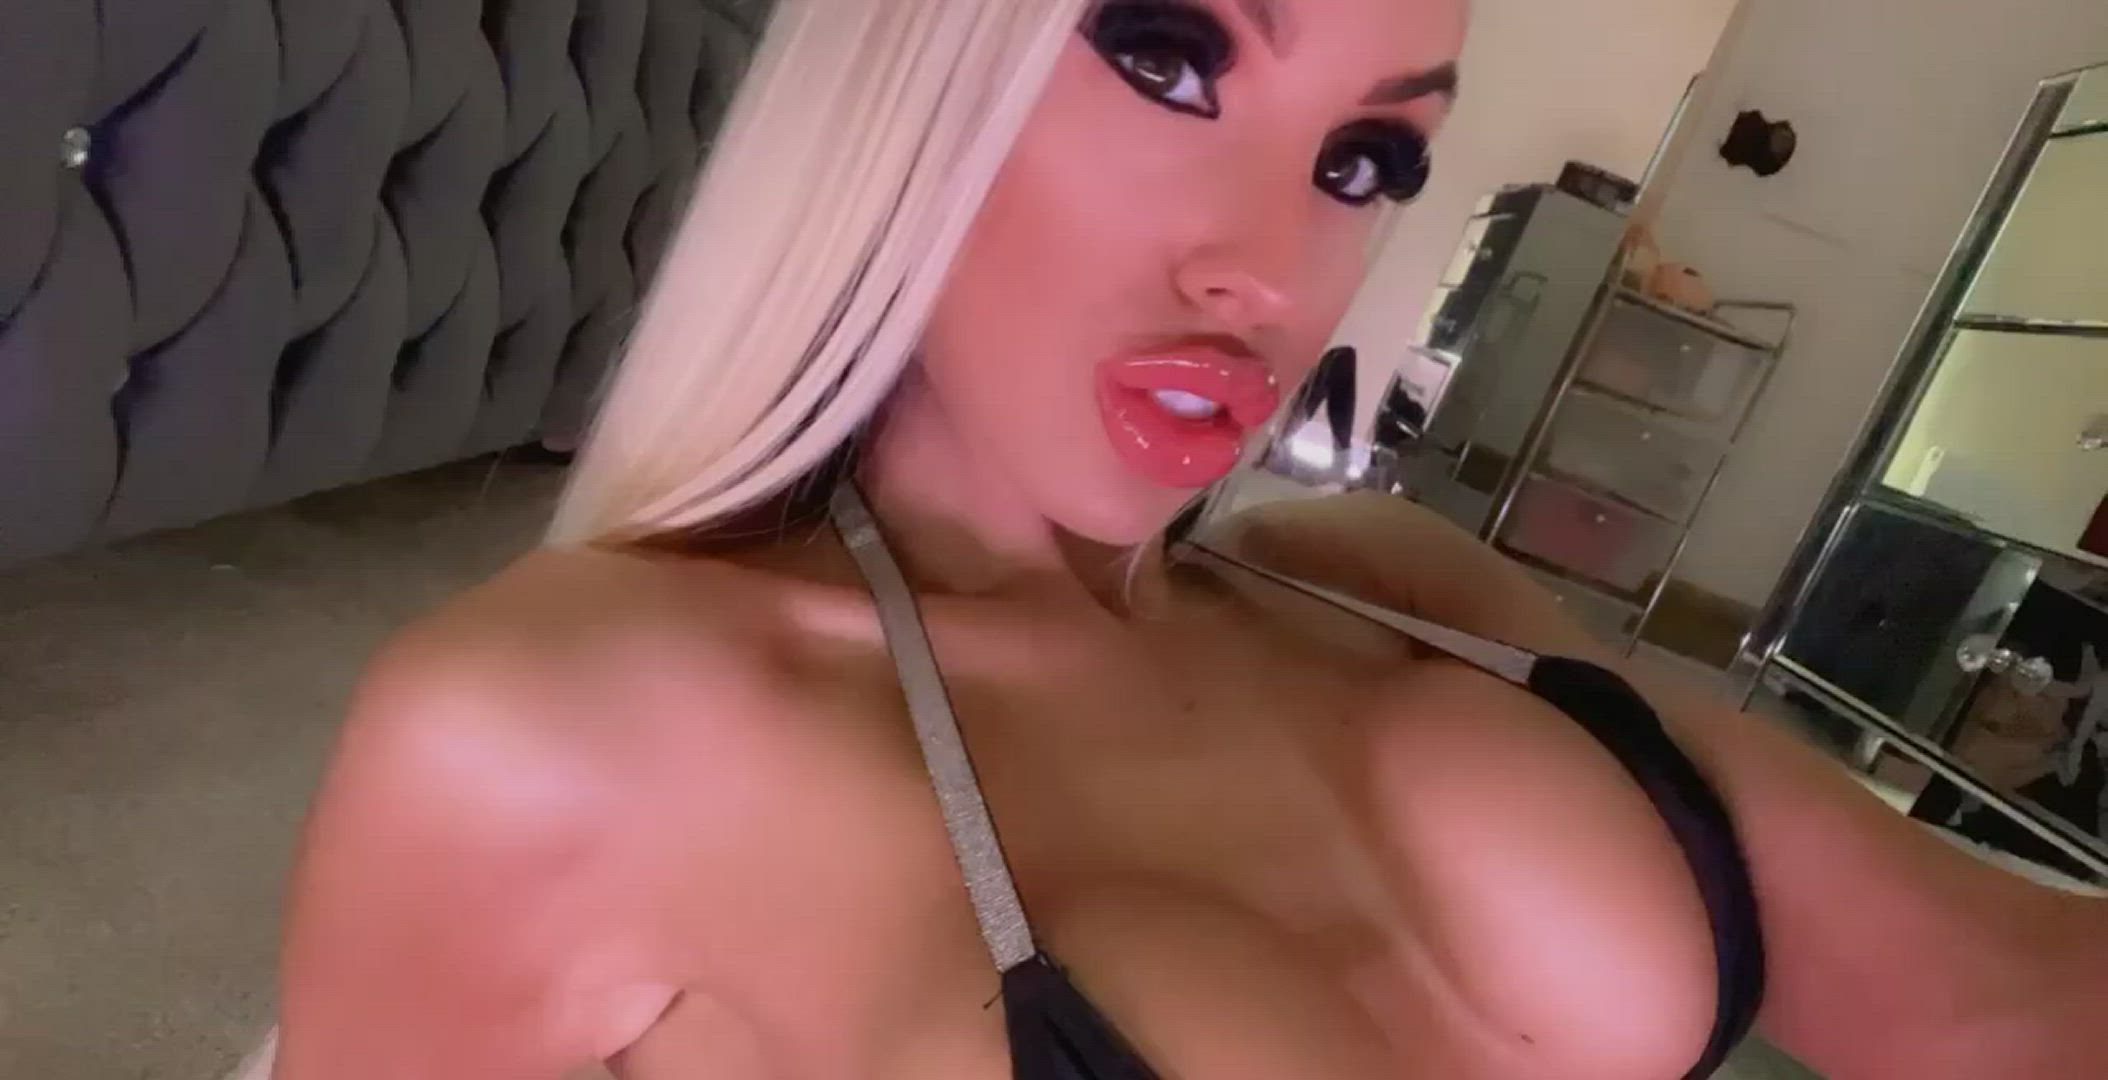 Amateur porn video with onlyfans model Playgirl Kimmi ✨ <strong>@playgirlkim</strong>